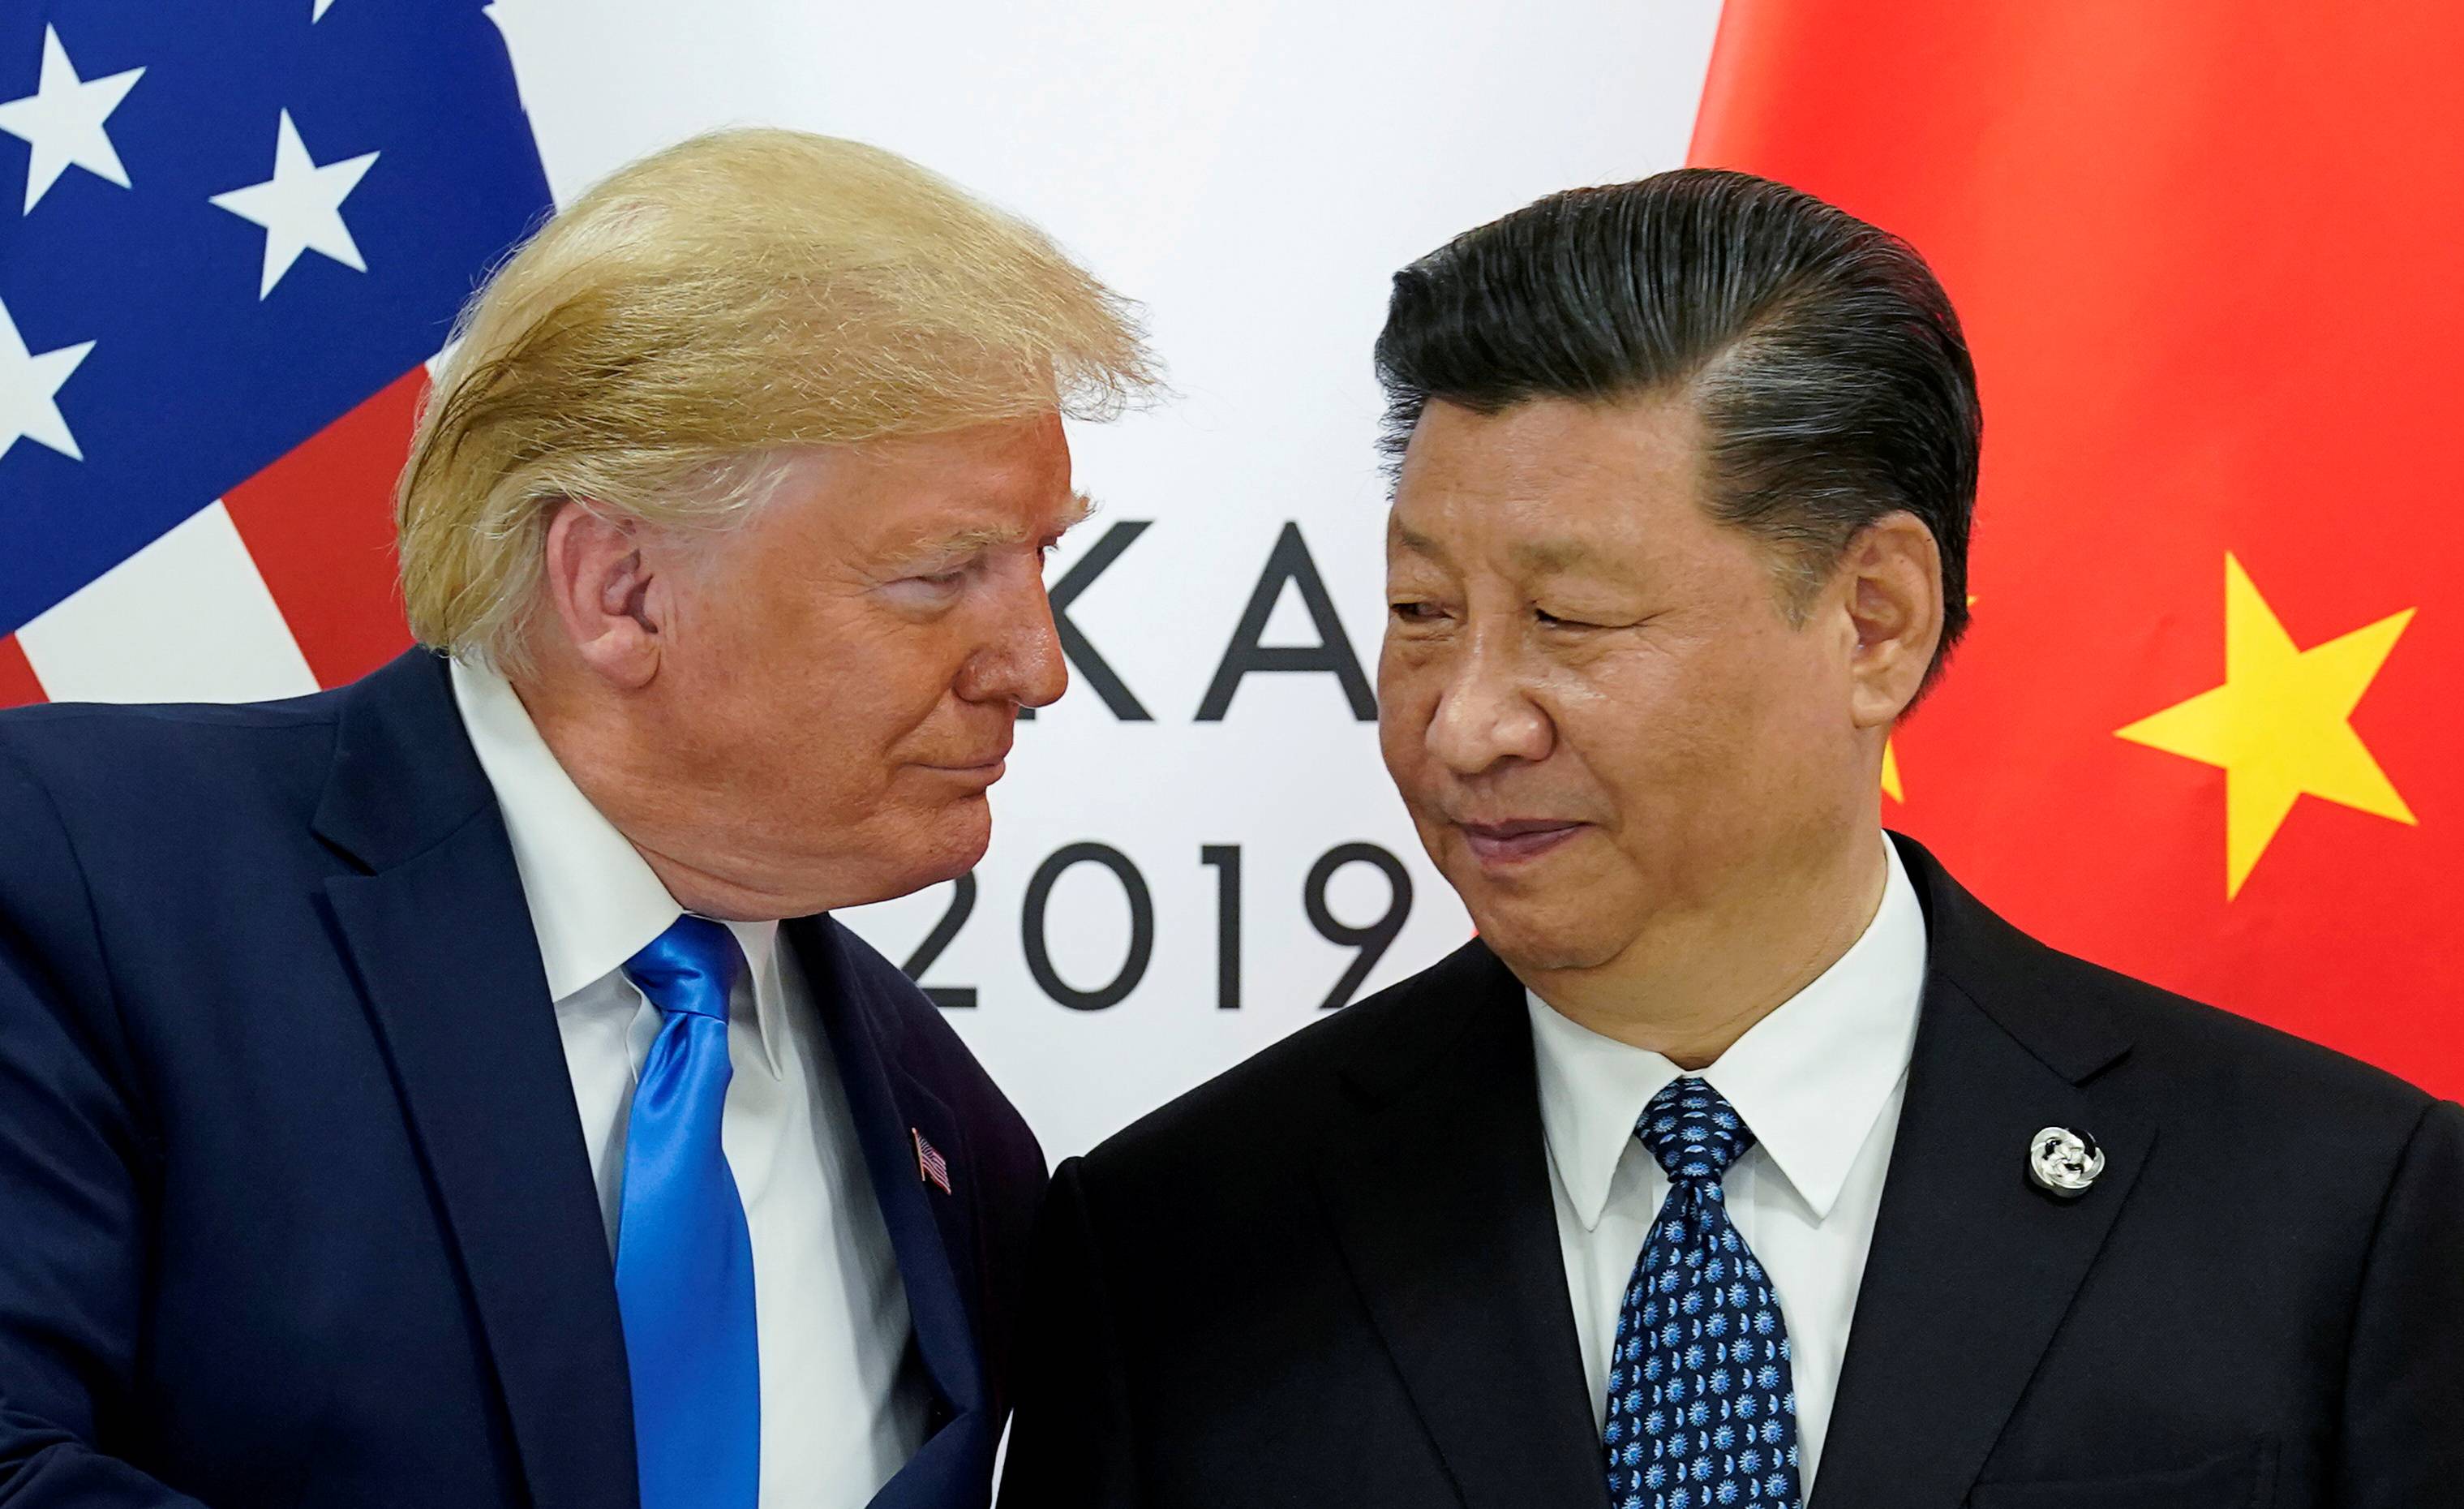 U.S. President Donald Trump meets with Chinese leader Xi Jinping at the start of their bilateral meeting at the Group of 20 leaders summit in Osaka in June 2019.  | REUTERS